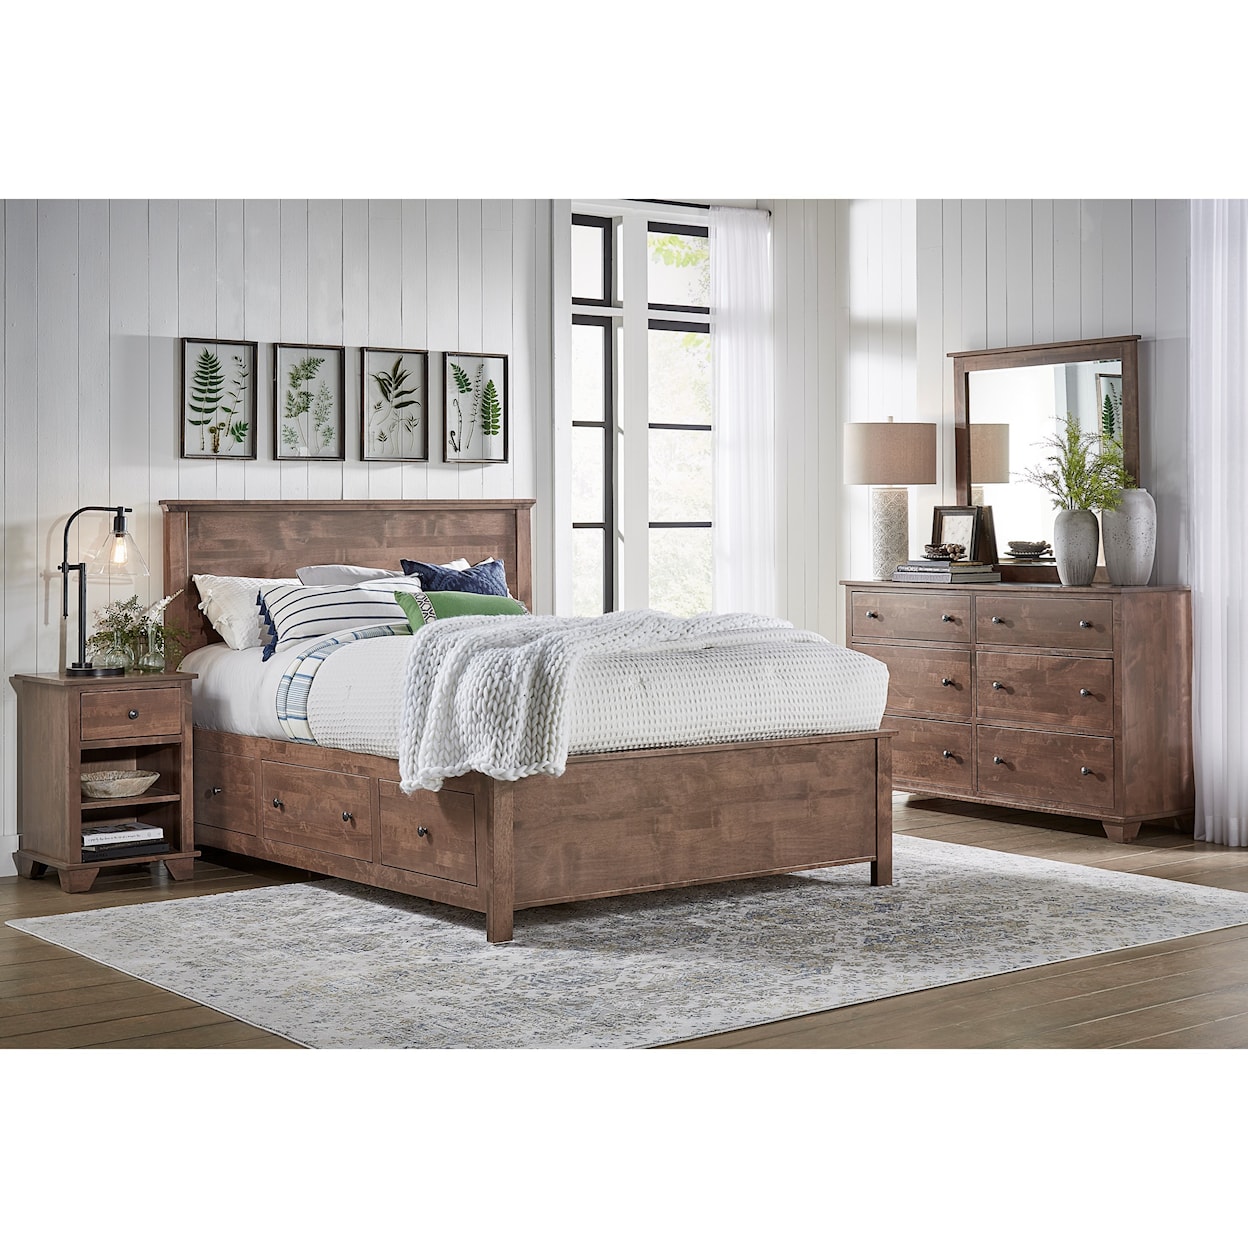 Archbold Furniture DO NOT USE - Shaker Elevated Storage Bed Bedroom Group